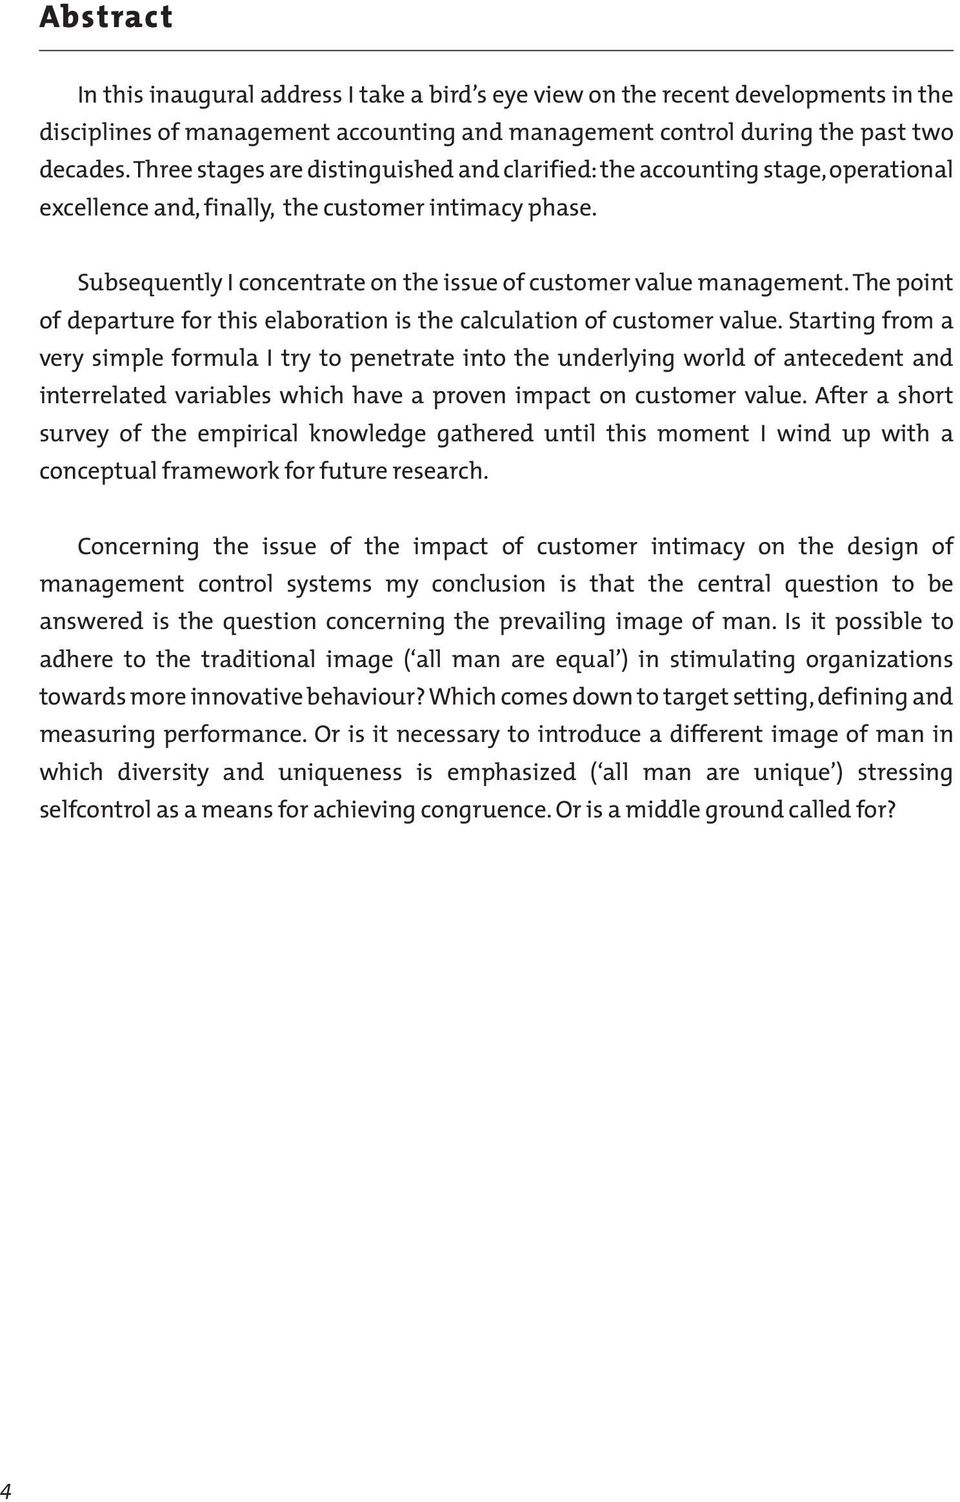 Subsequently I concentrate on the issue of customer value management. The point of departure for this elaboration is the calculation of customer value.